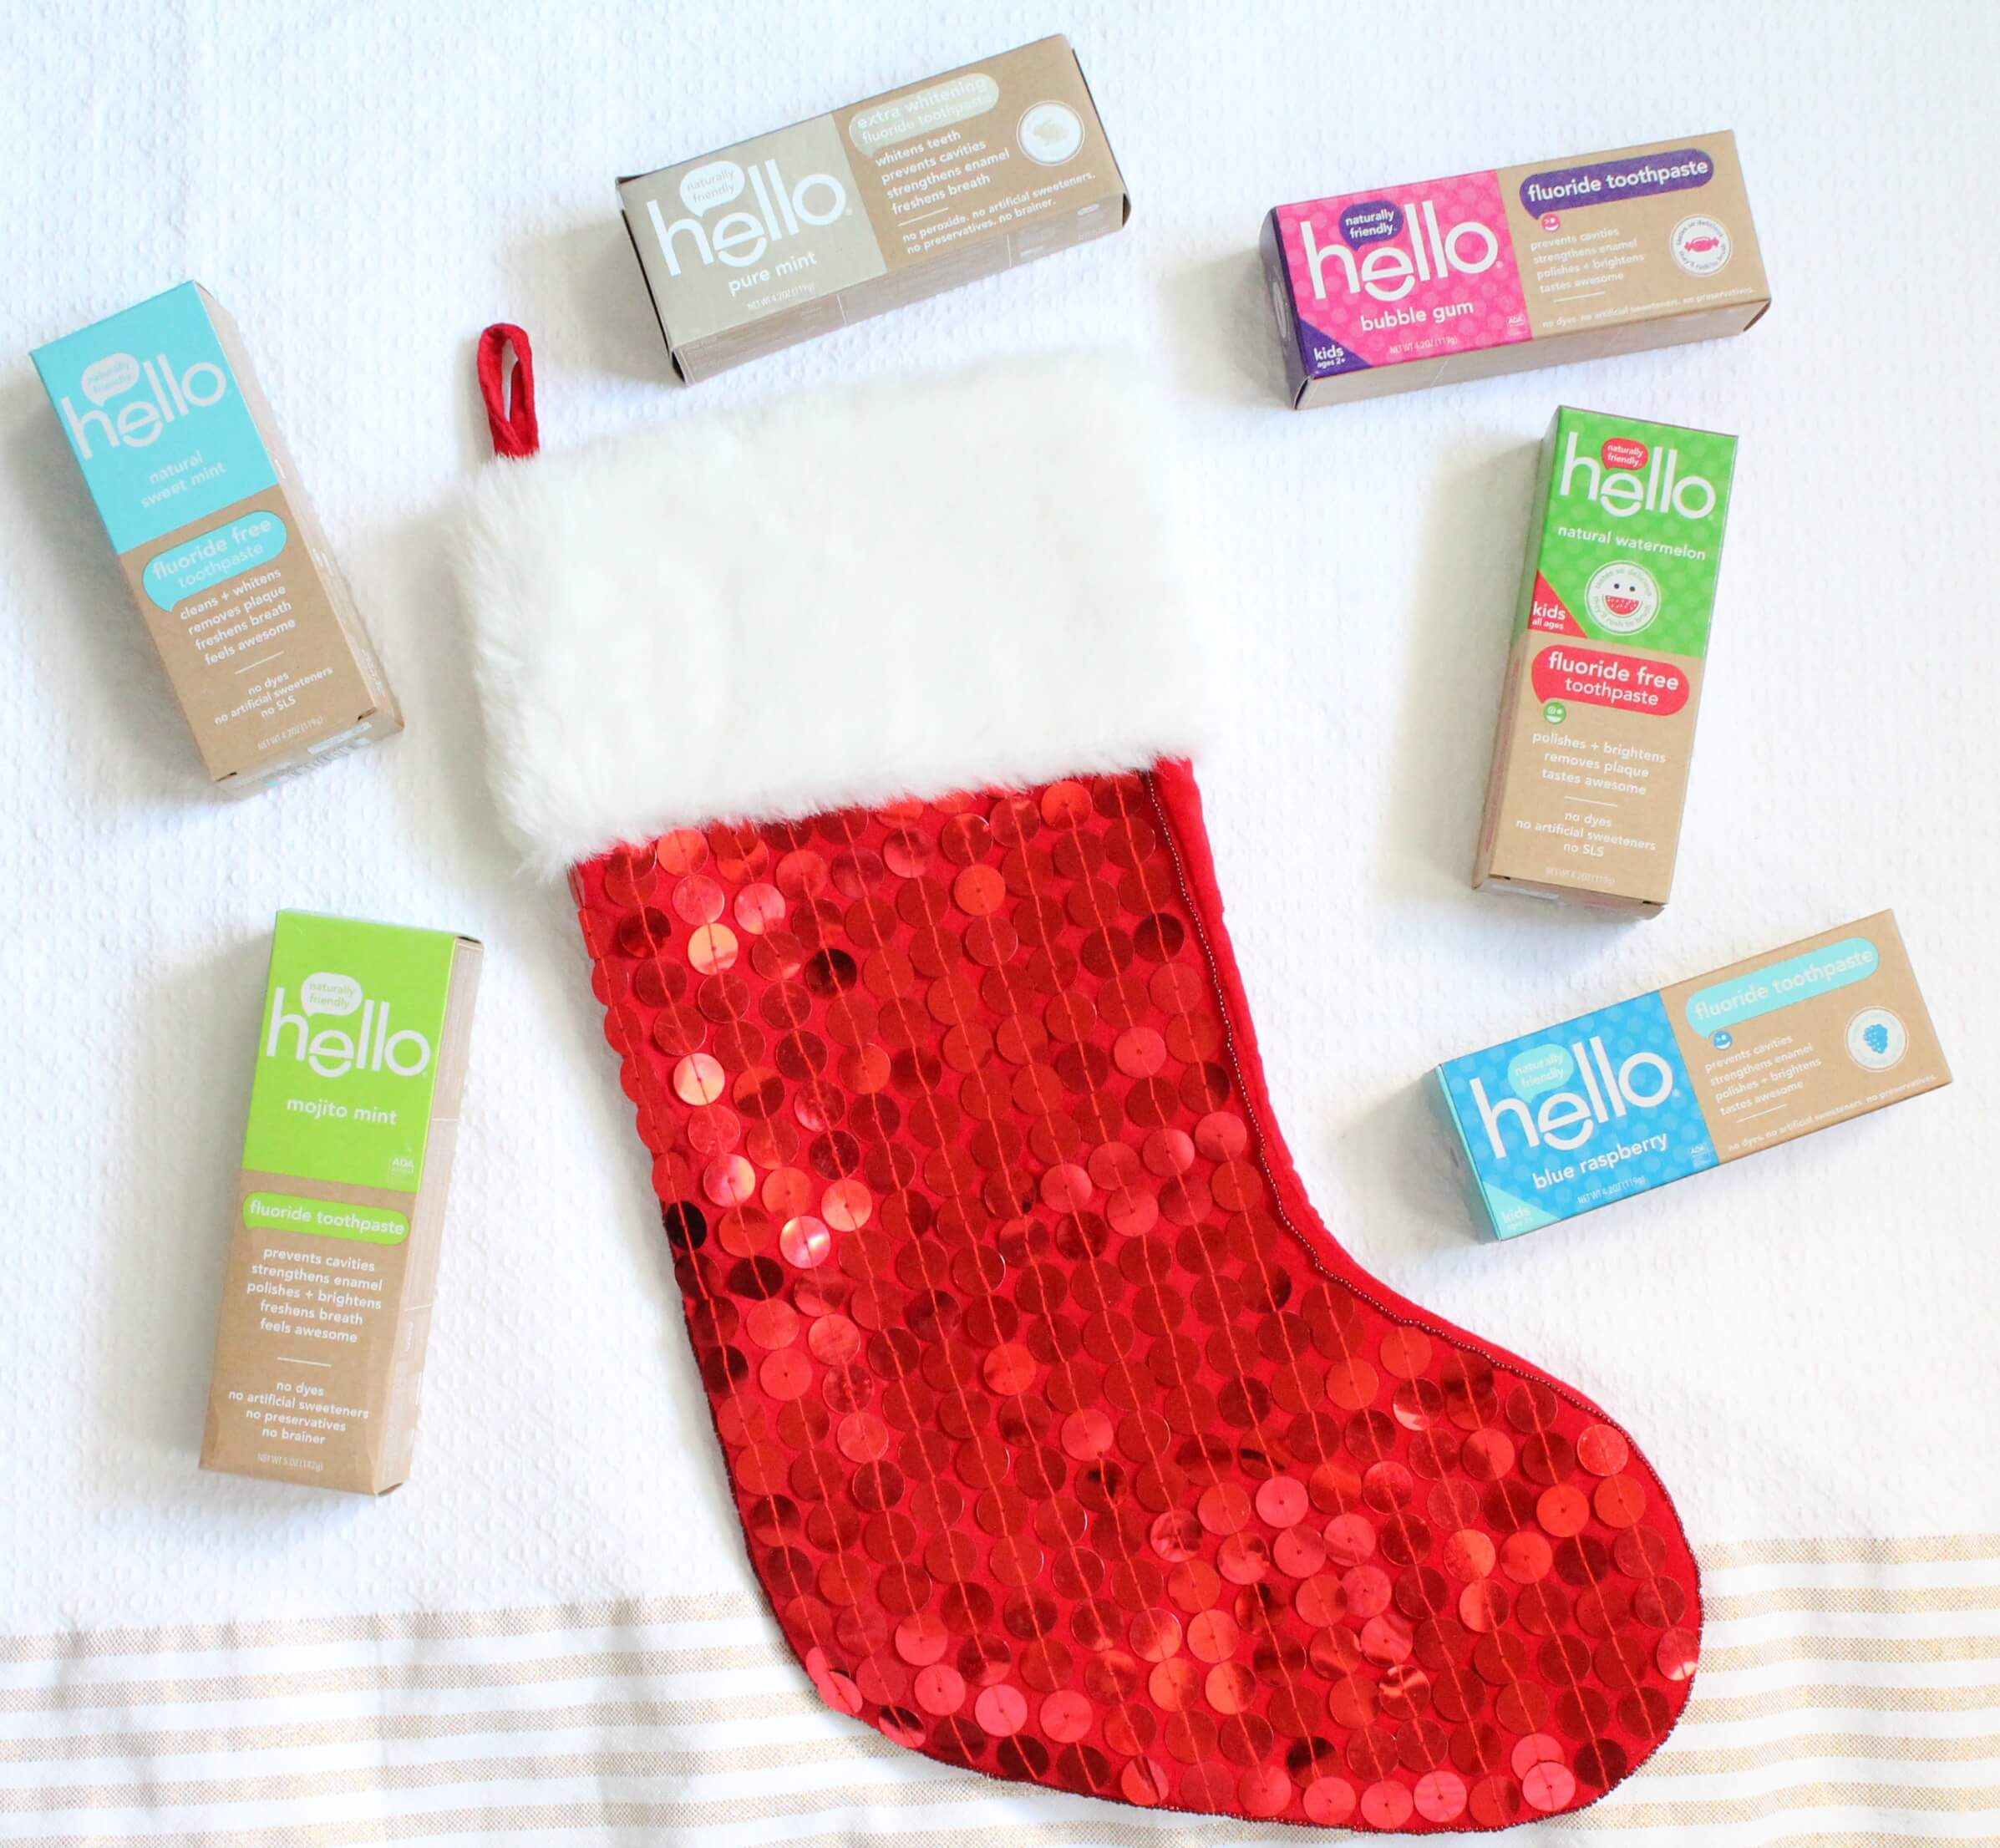 Fun and naturally friendly toothpaste makes for the perfect stocking stuffer!